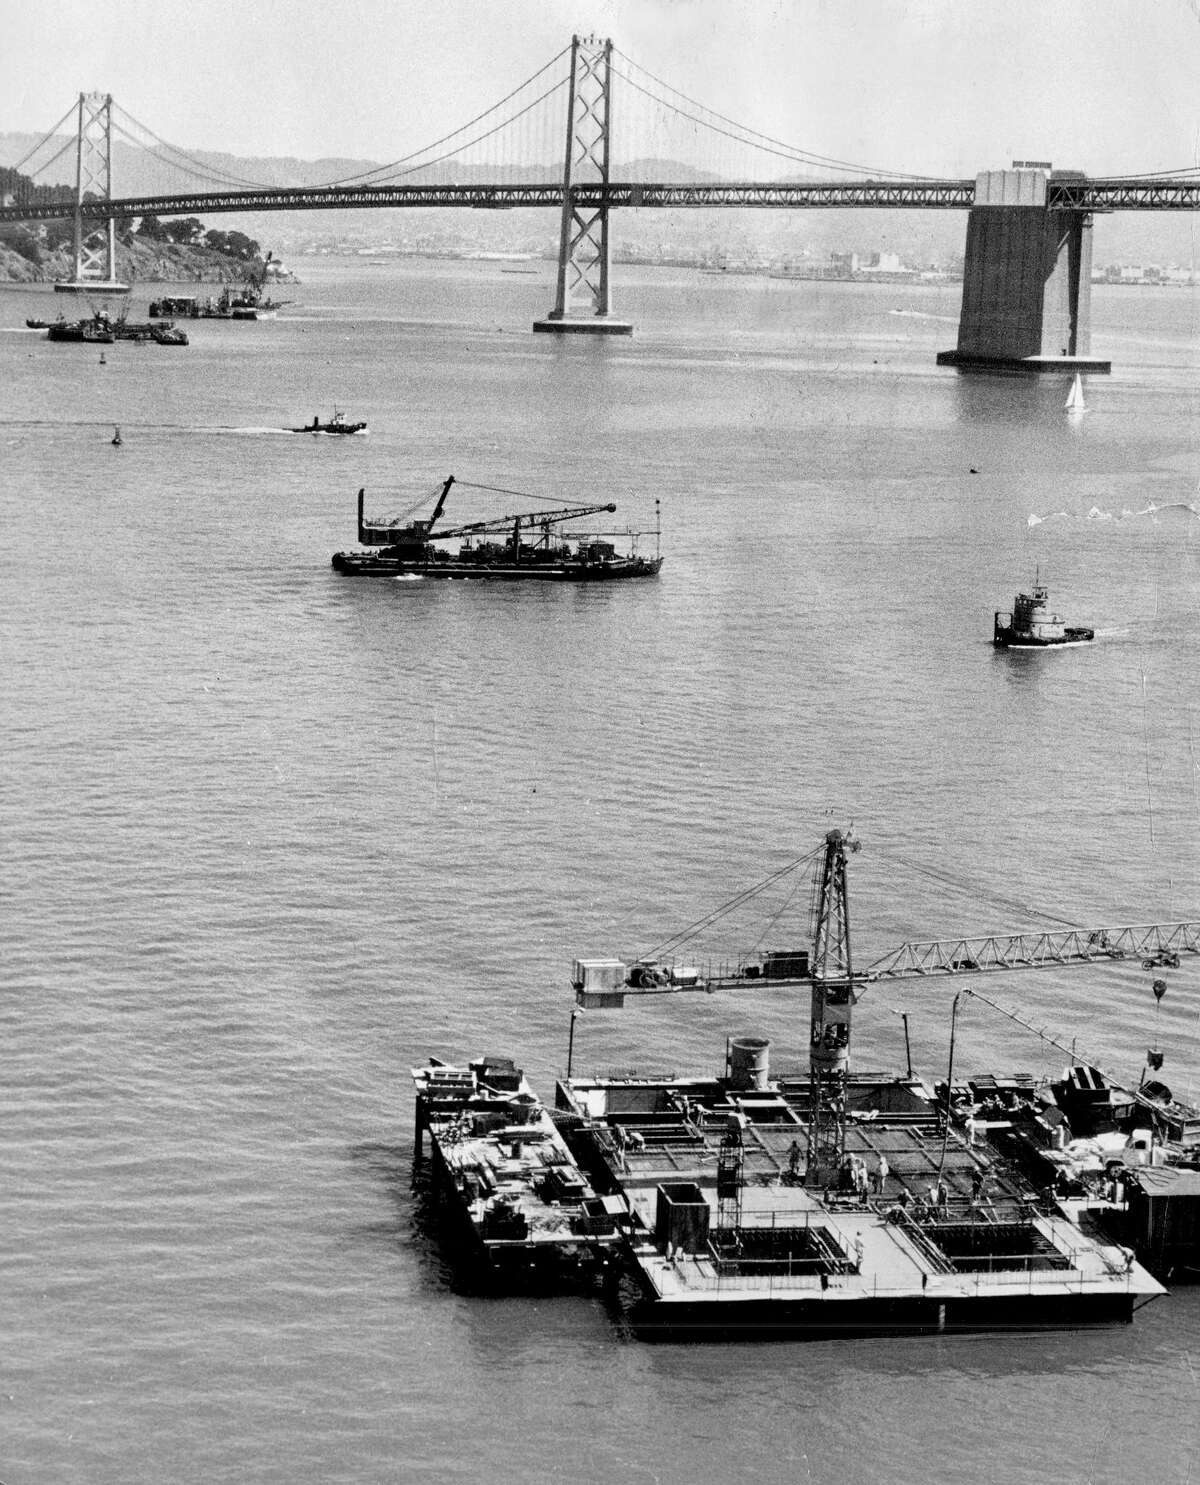 Sept.  20, 1968: A view from the clock tower of the Ferry Building looking out toward barges assisting in the construction of the BART Transbay Tube.